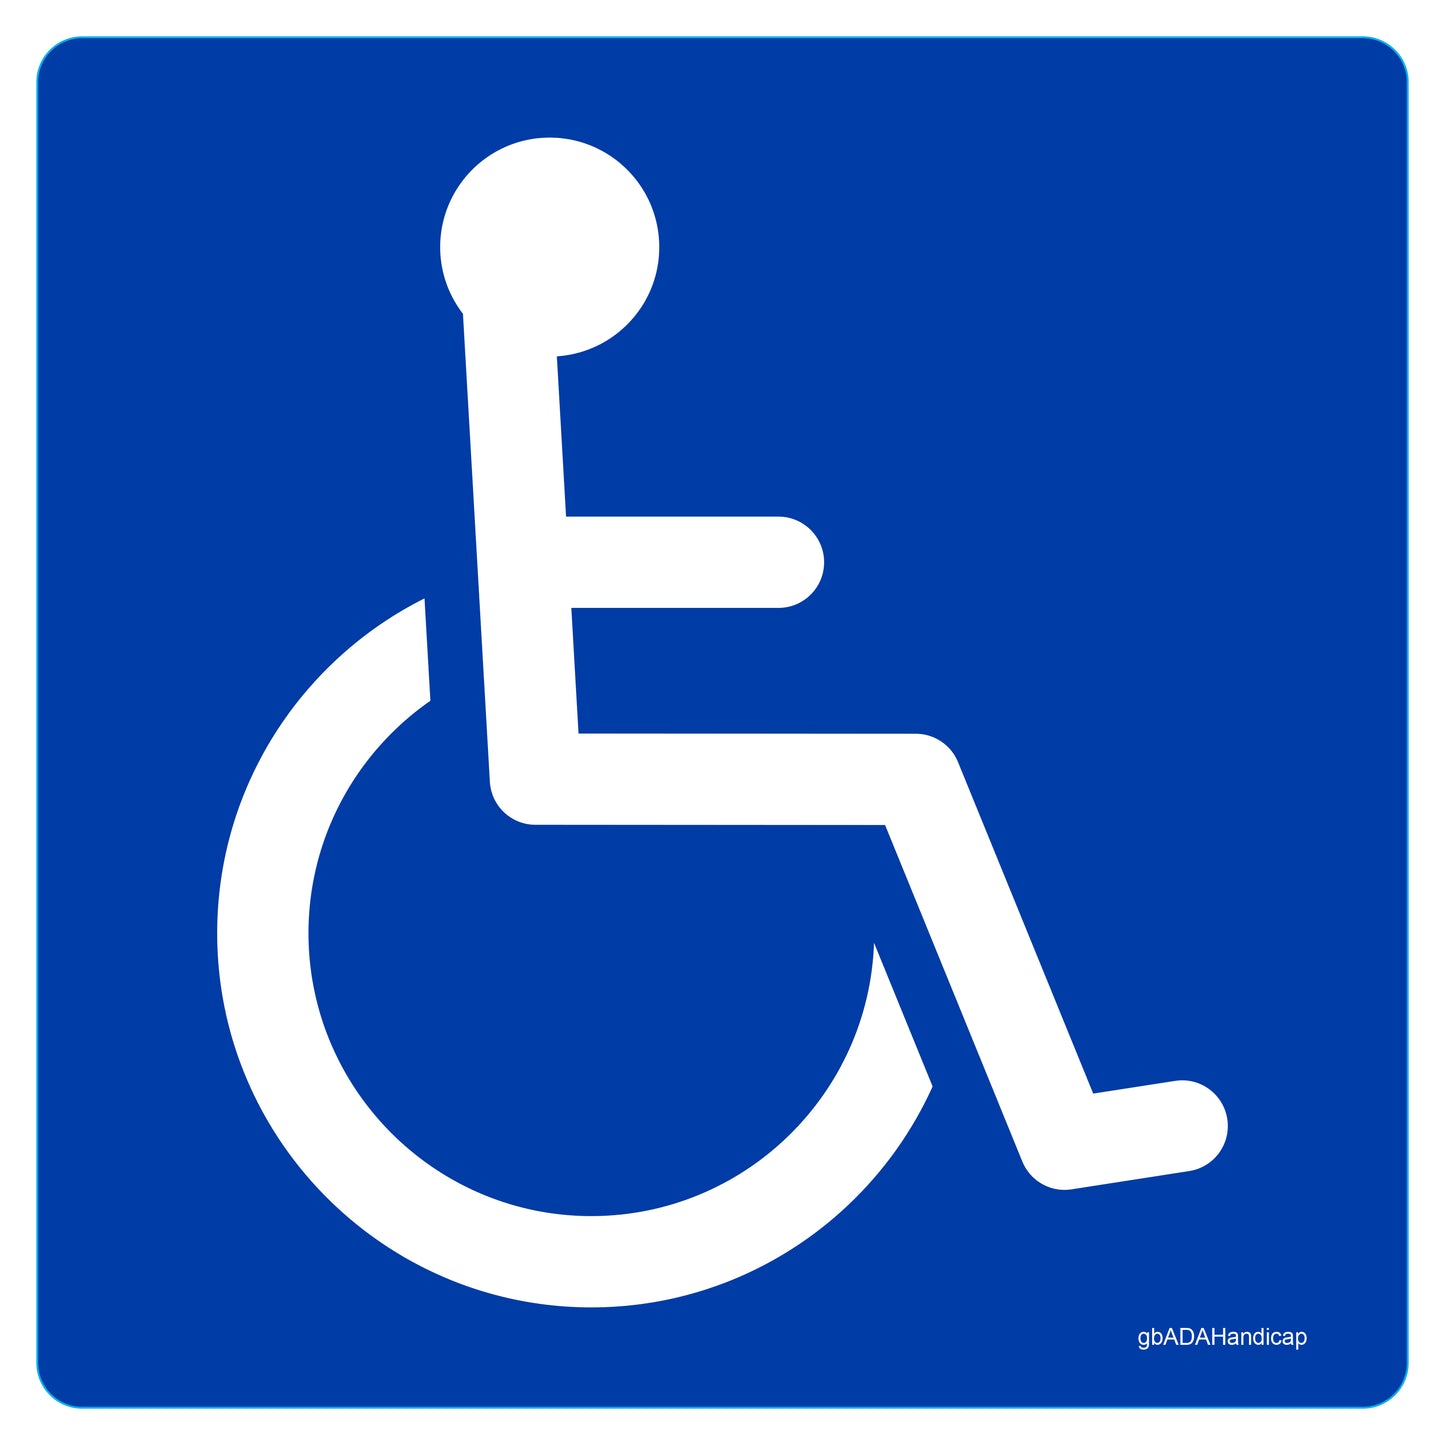 ADA Handicap Decal. 5 inches by 5 inches in size.